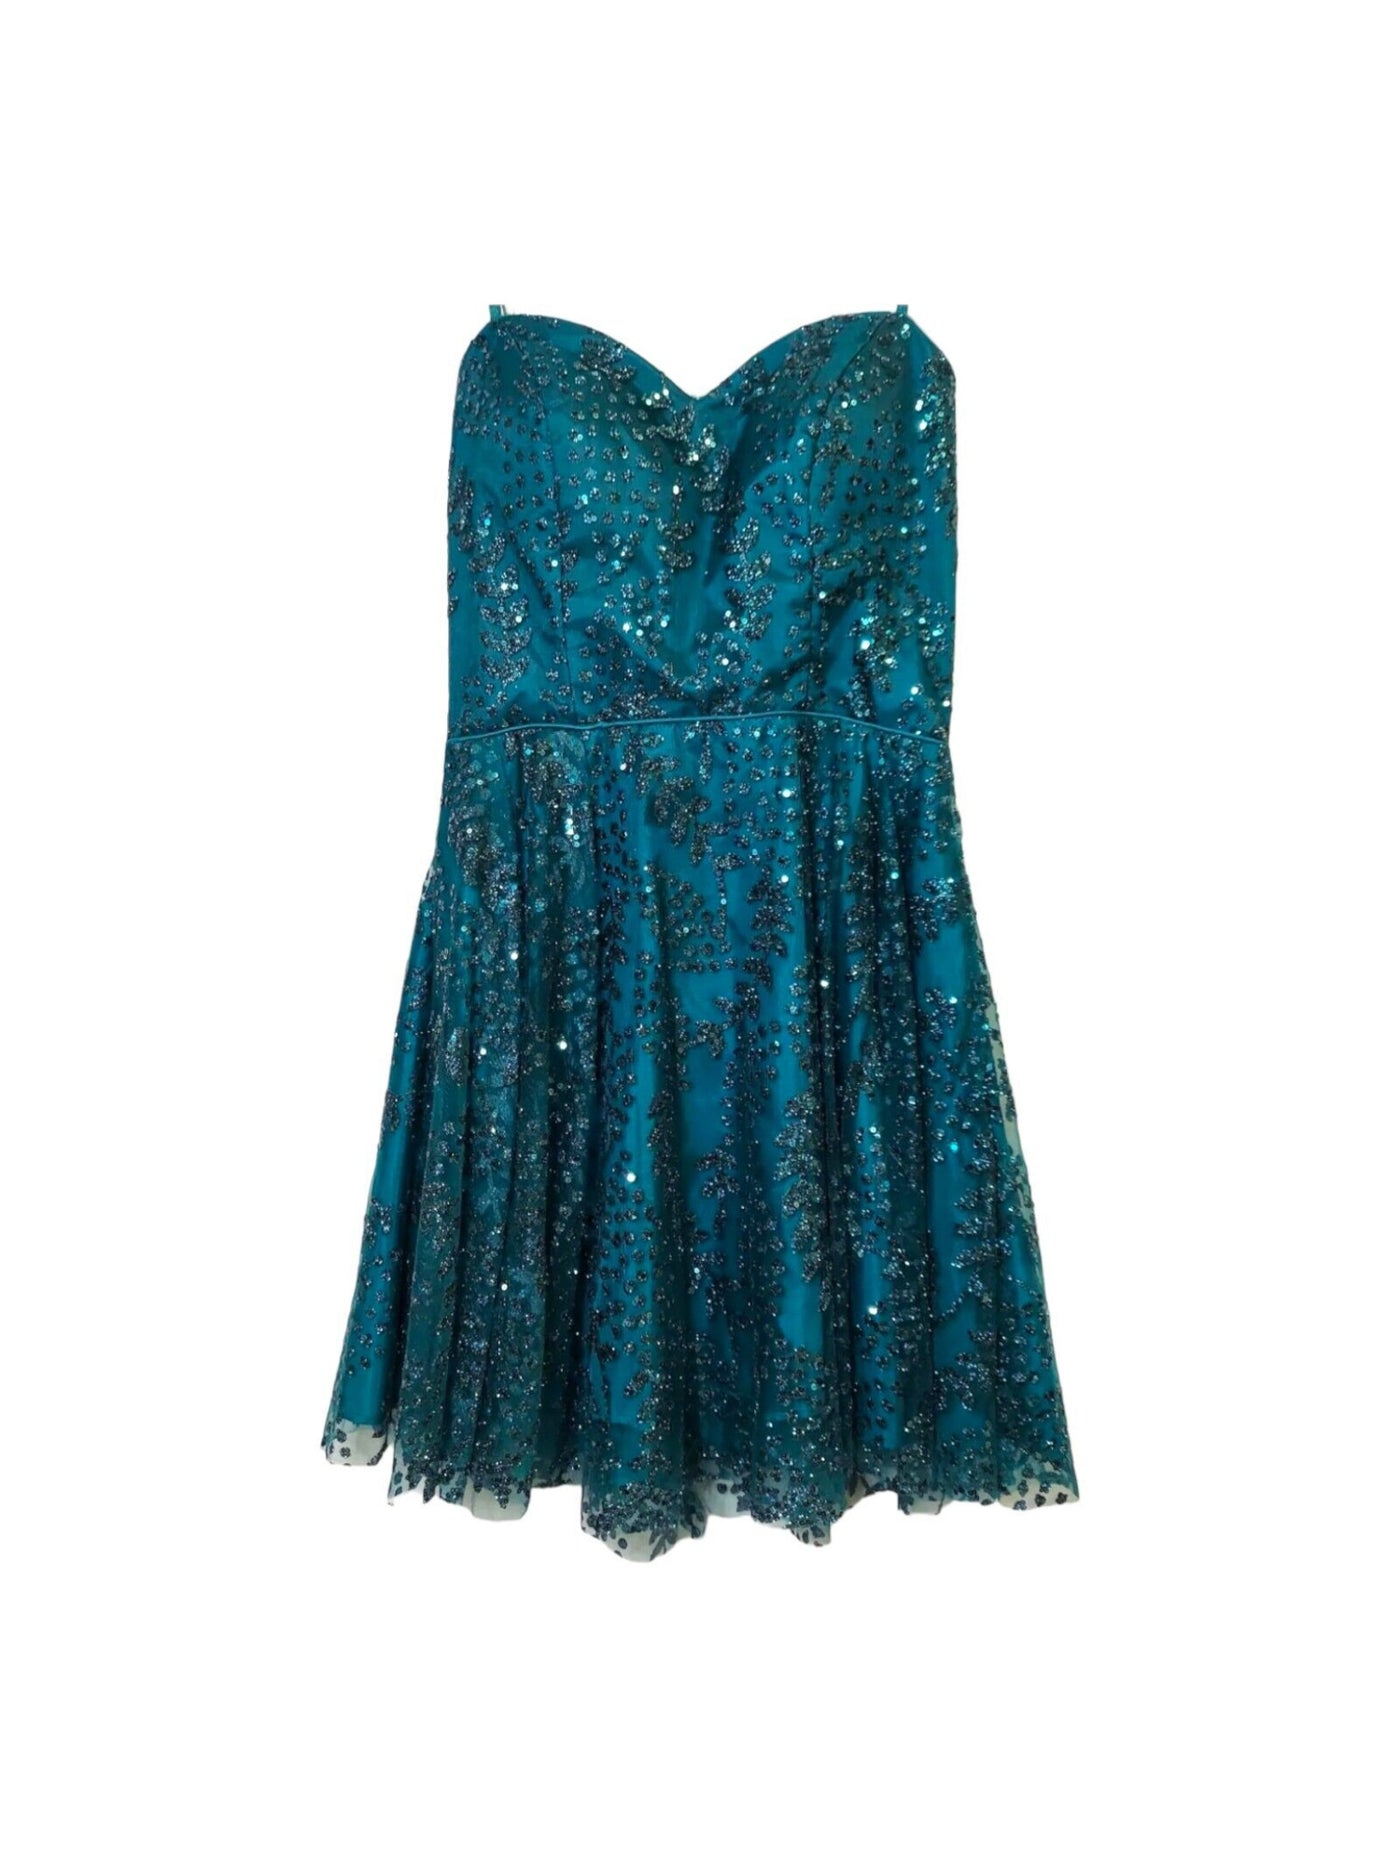 BLONDIE NITES Womens Teal Sequined Glitter Lined Adjustable Zippered Sleeveless Round Neck Short Party Fit + Flare Dress Juniors 11